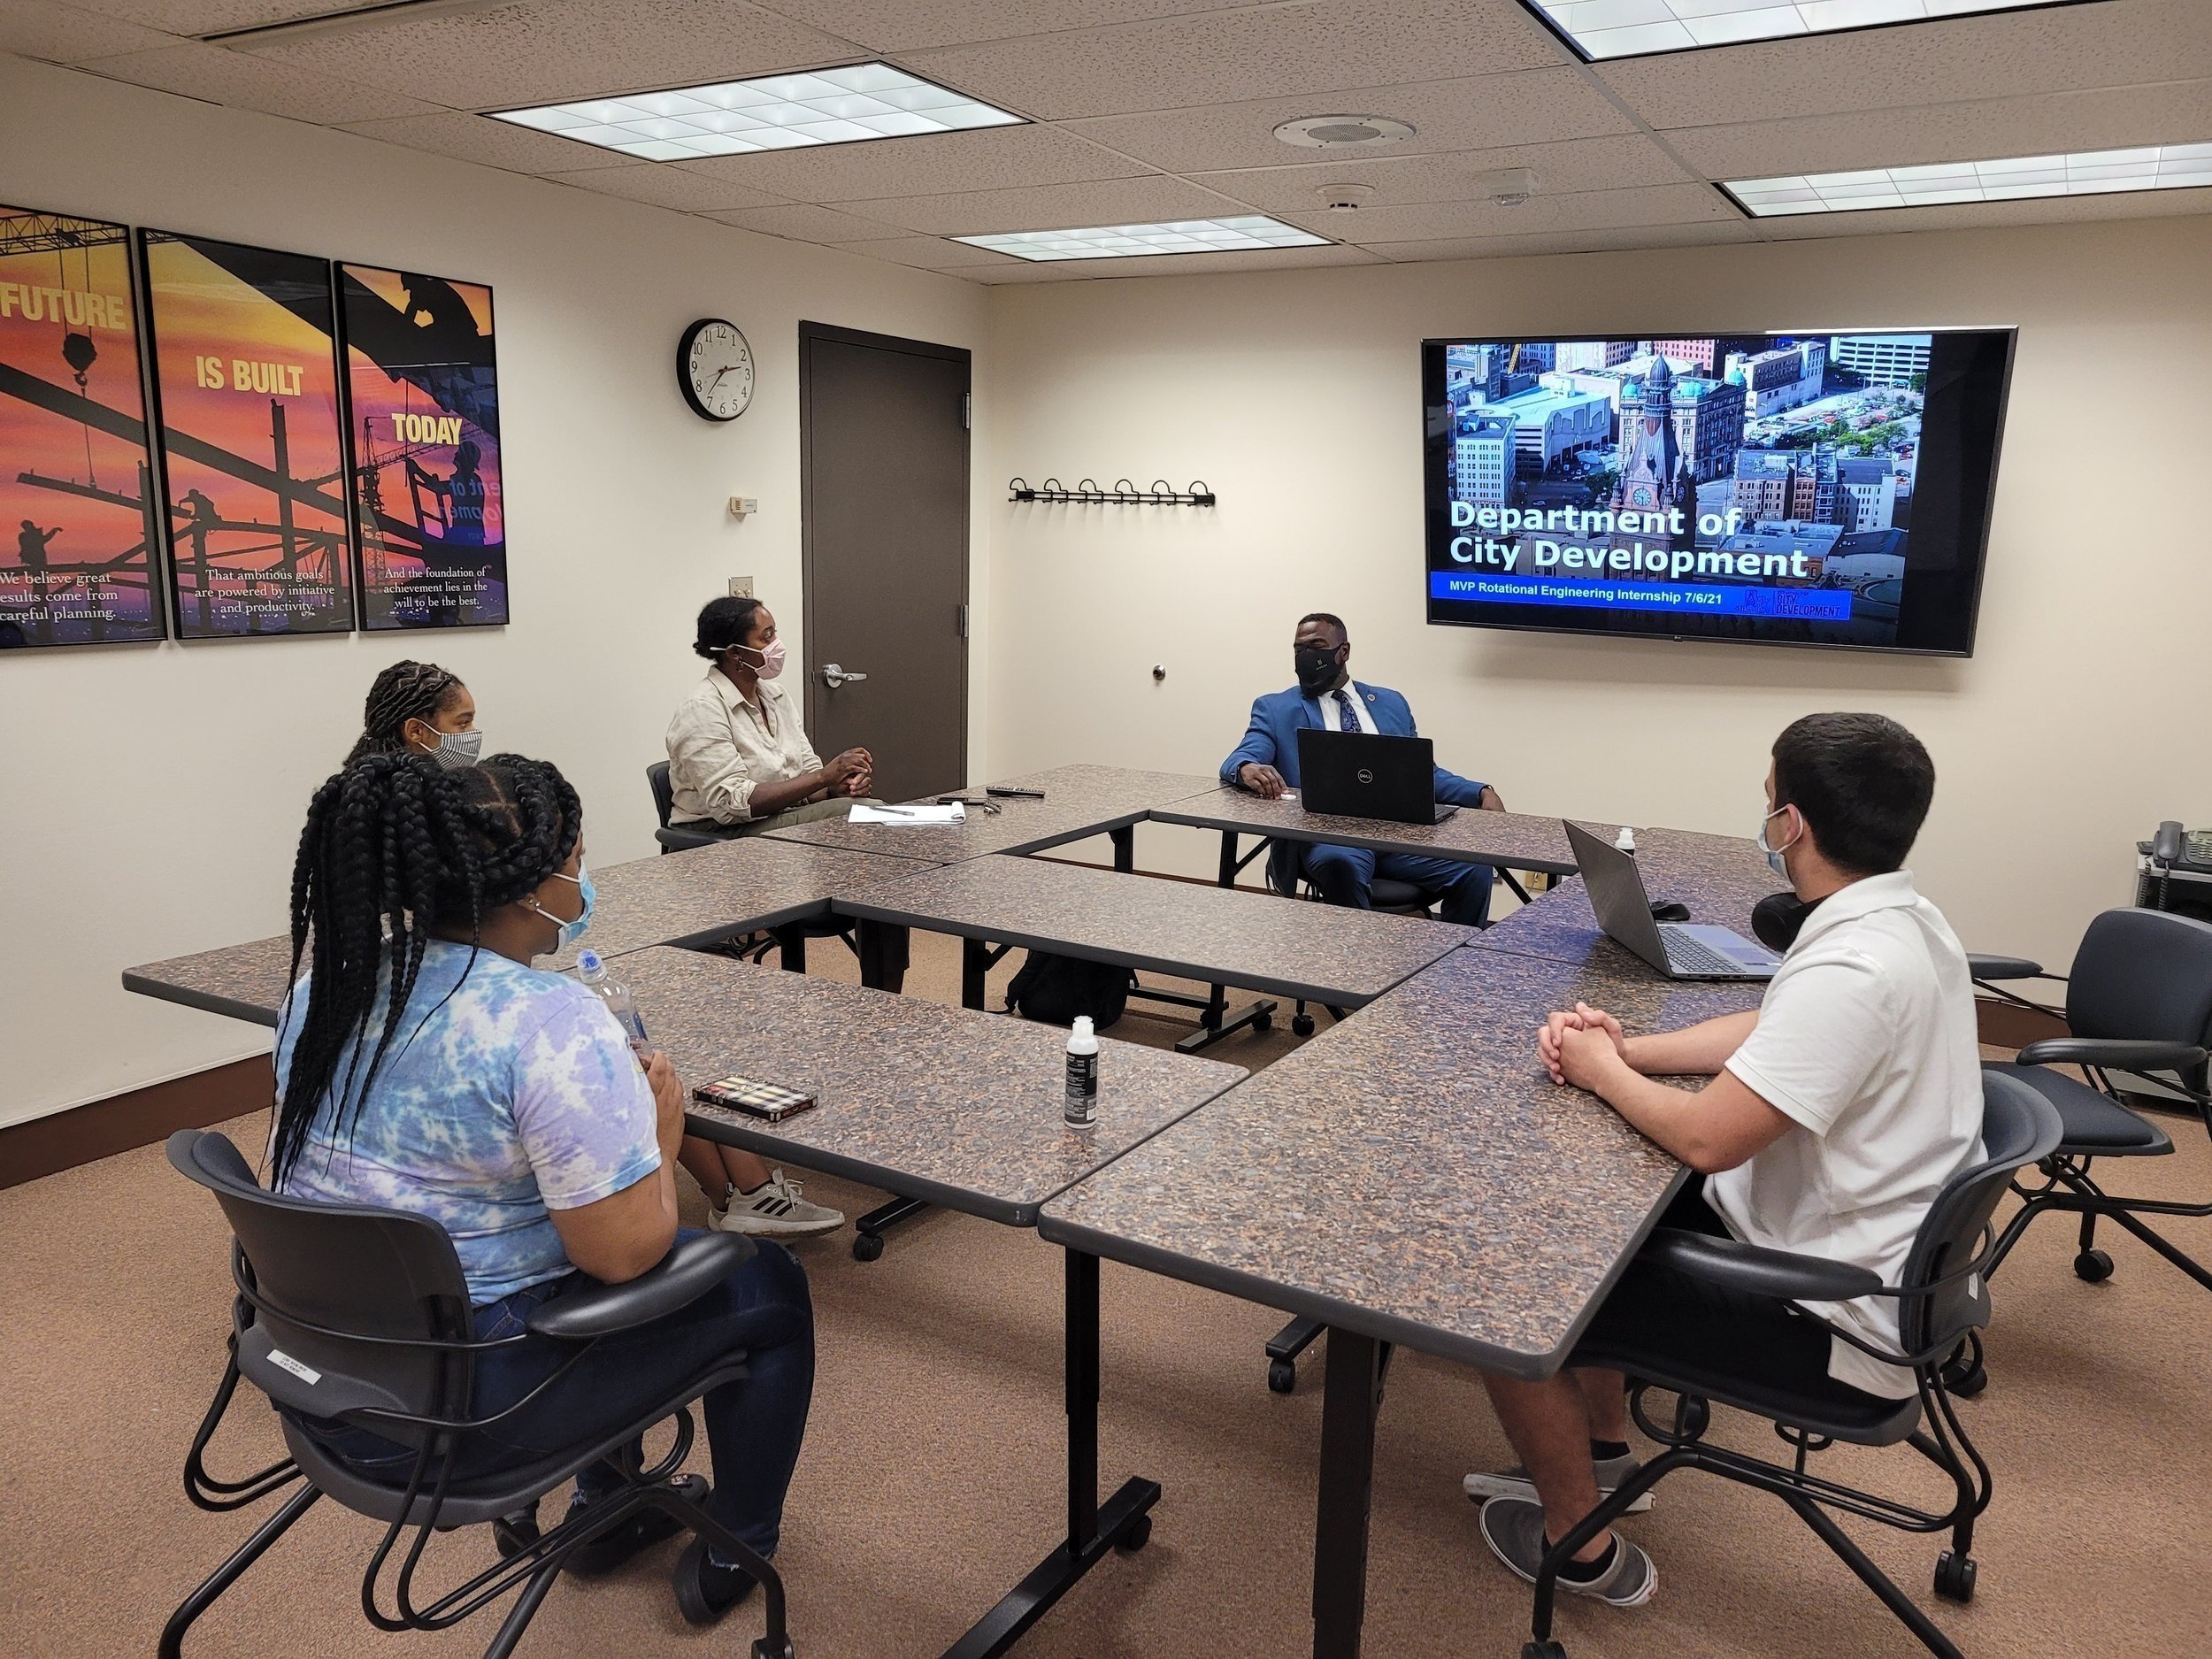 Interns learn about the Department of City Development from Commissioner Crump